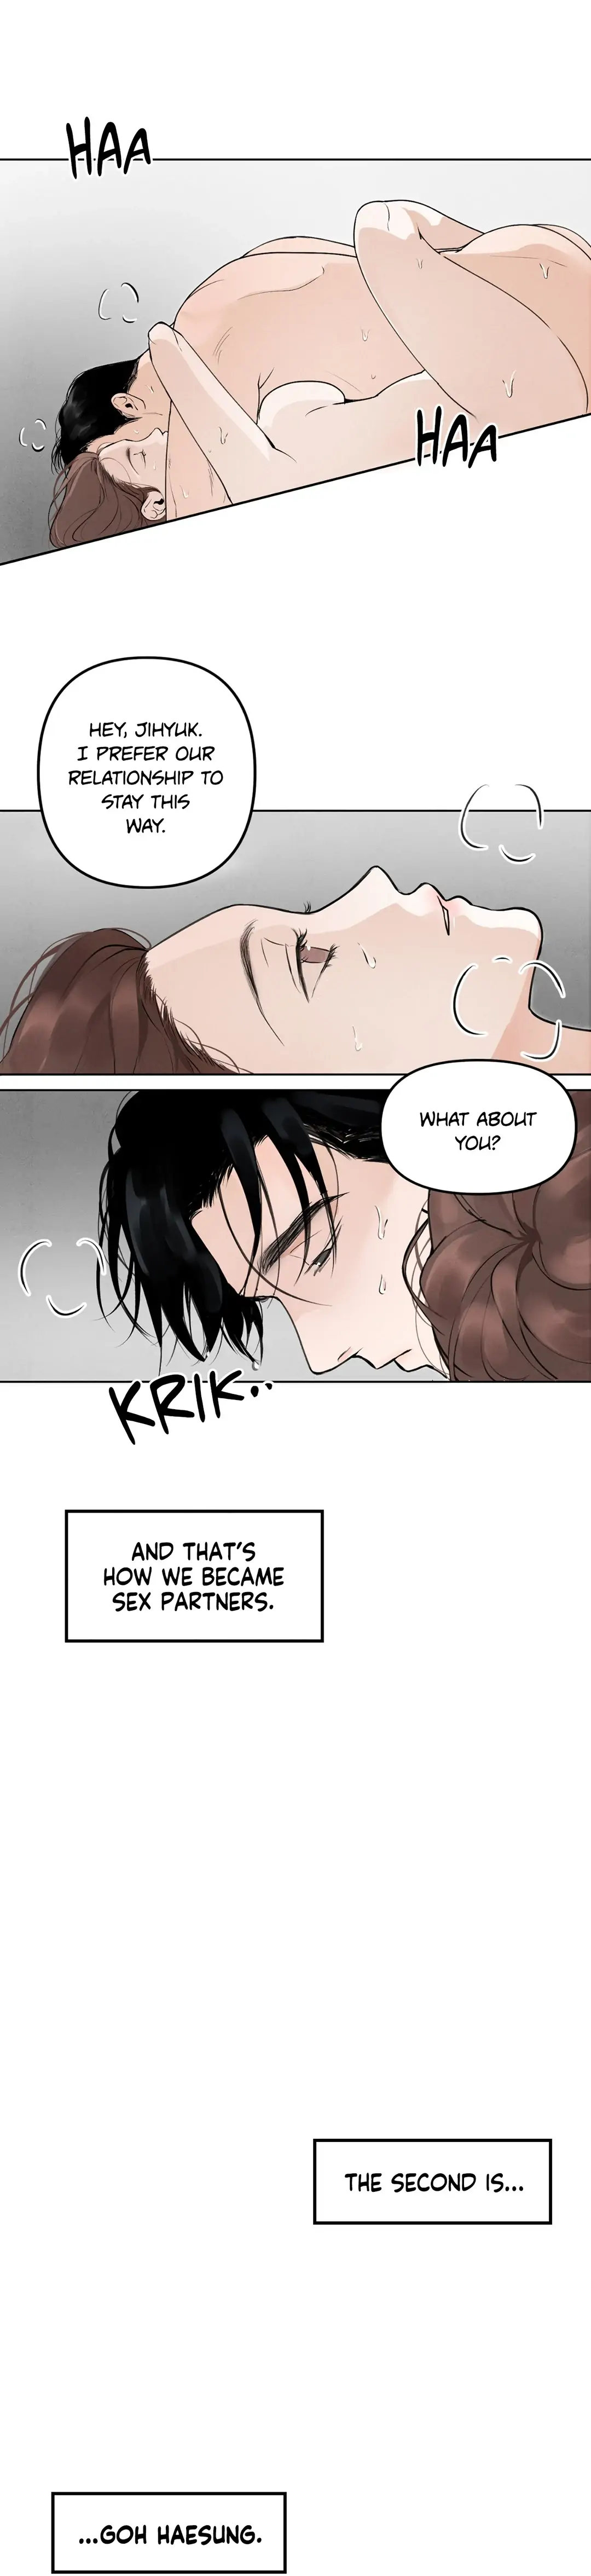 The Men in My Bed - Chapter 1 Page 11